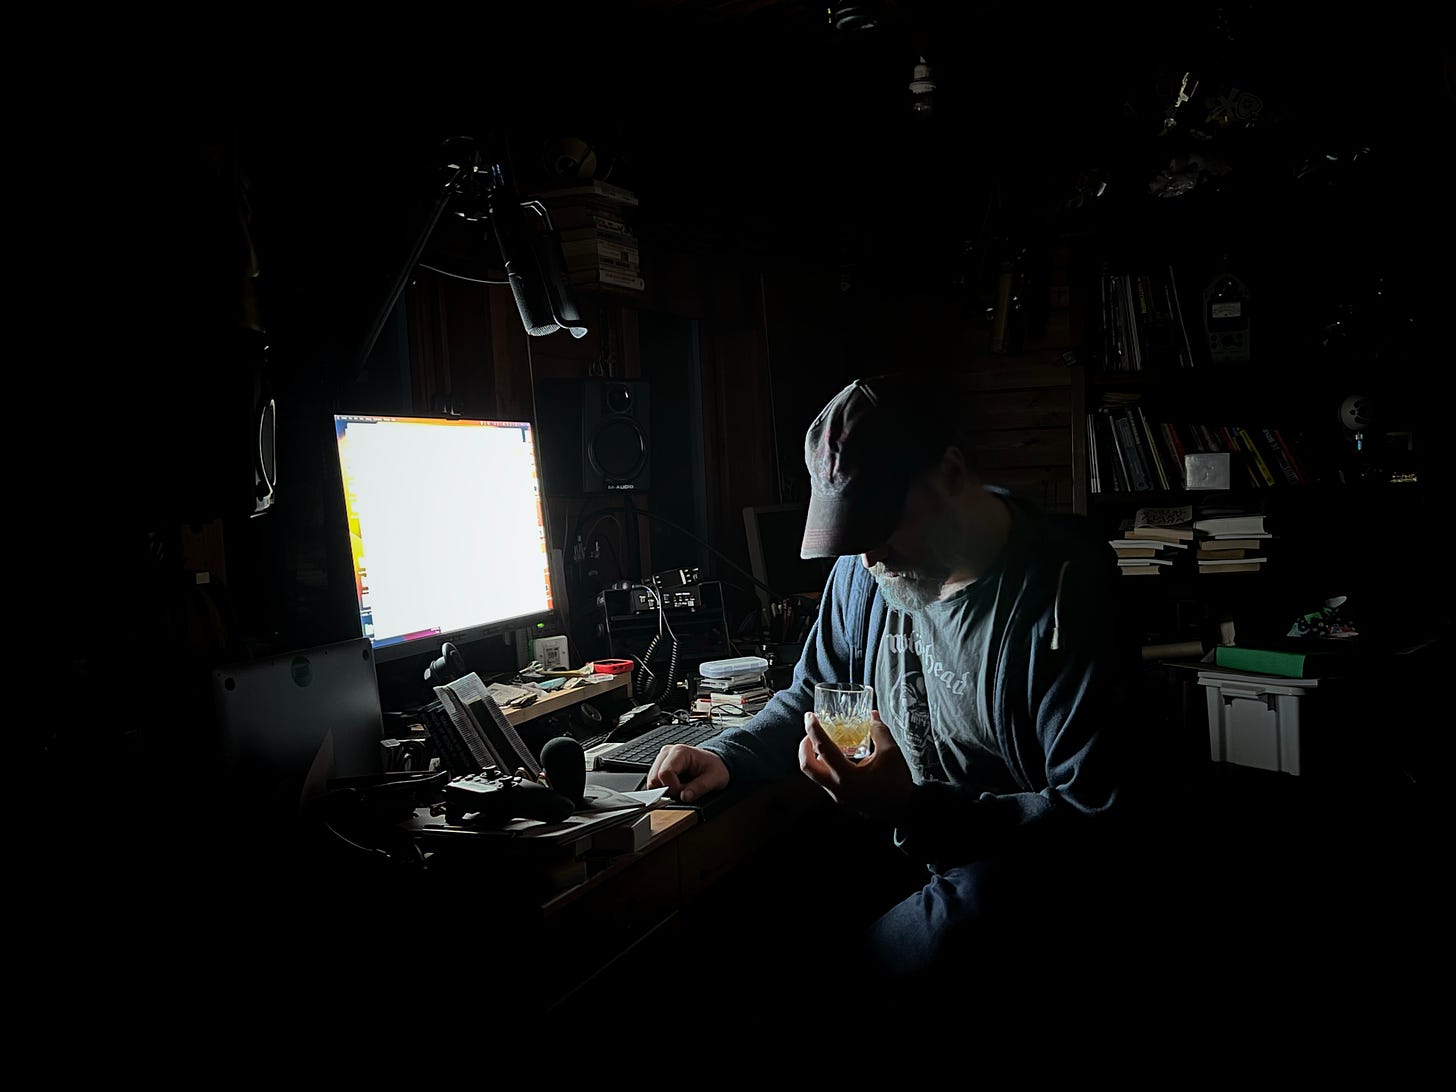 A photo of me in the shed. lit by the glow of a screen and placing down intro a glass of whistle pig whiskey.